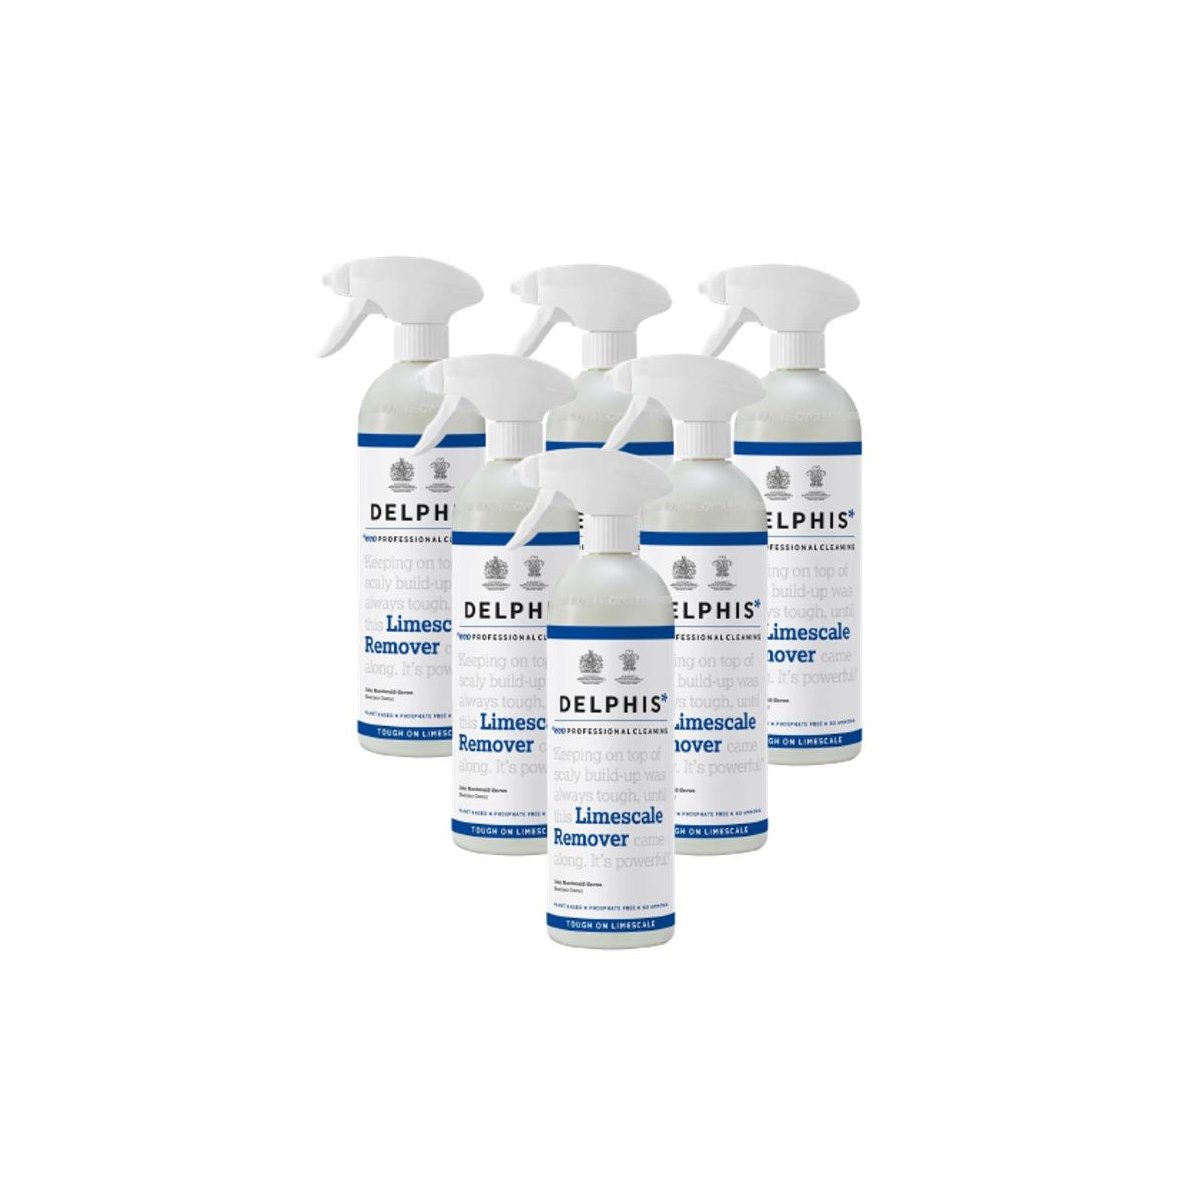 Case of 6 x Delphis Eco Professional Cleaning Limescale Remover Spray 700ml 